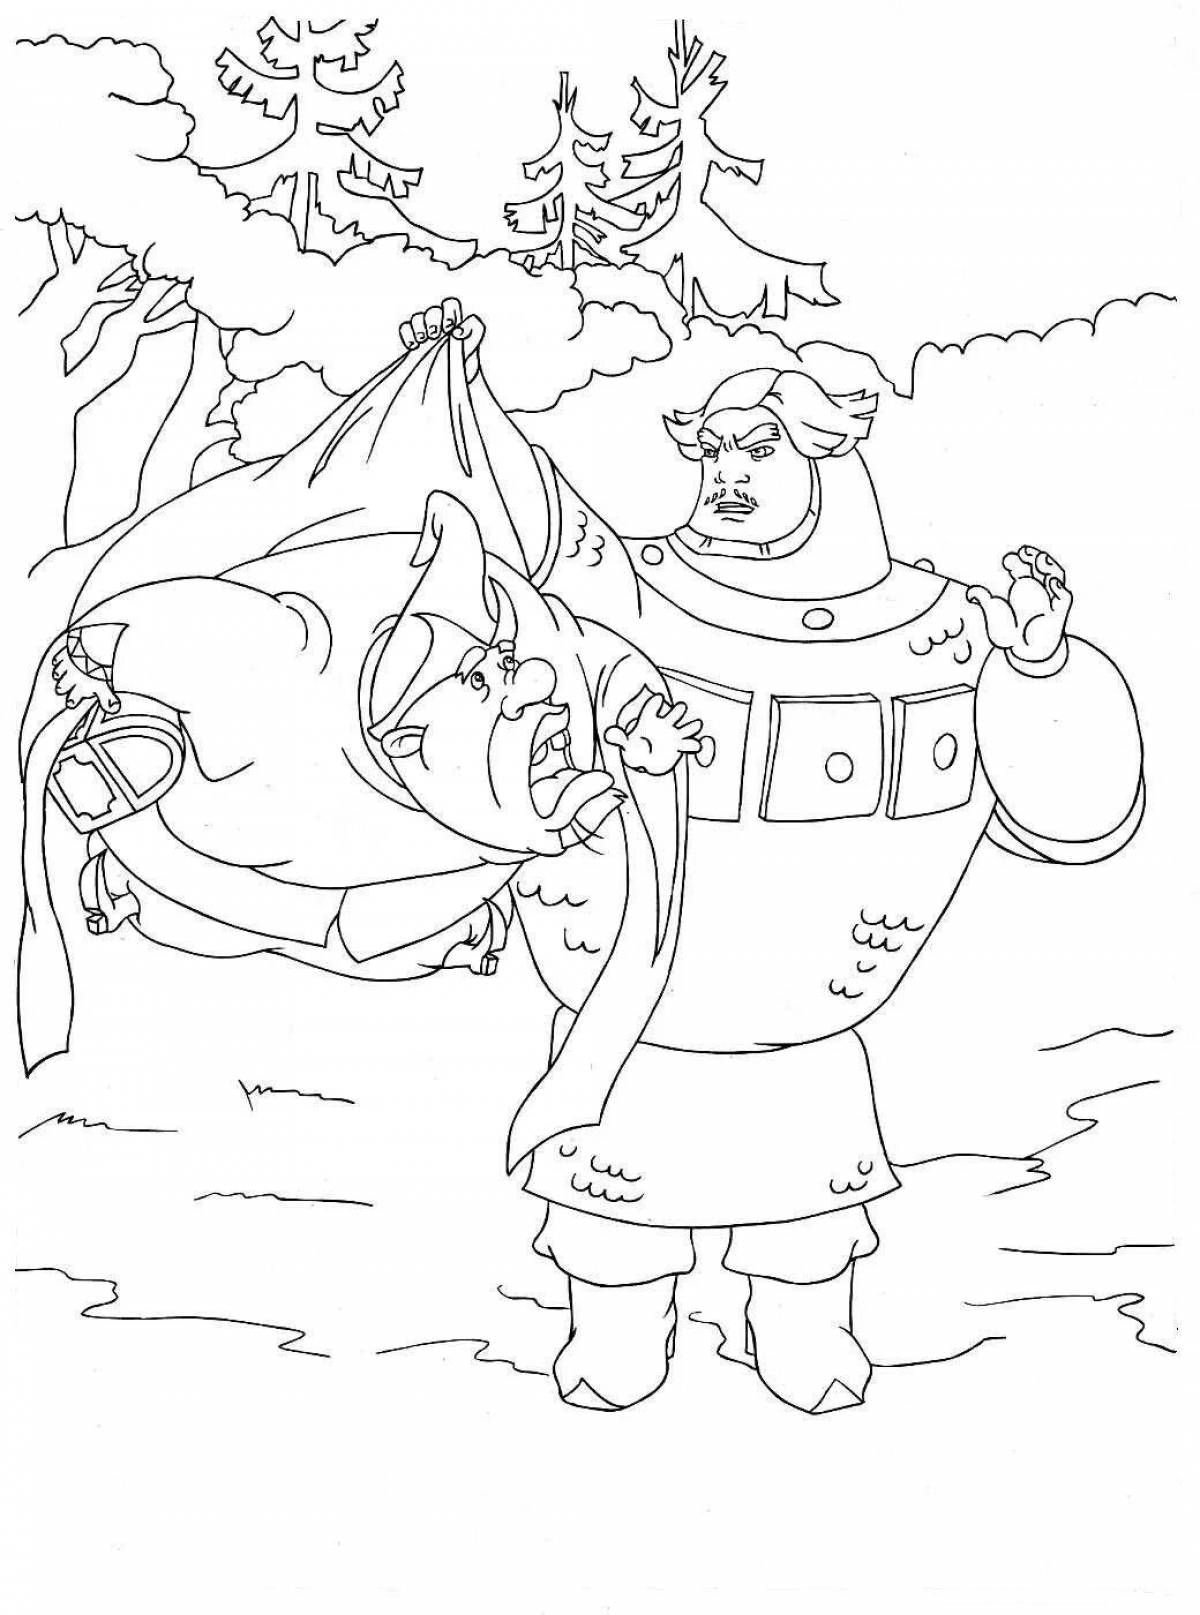 Coloring page the magnificent heroes of Vasnetsov